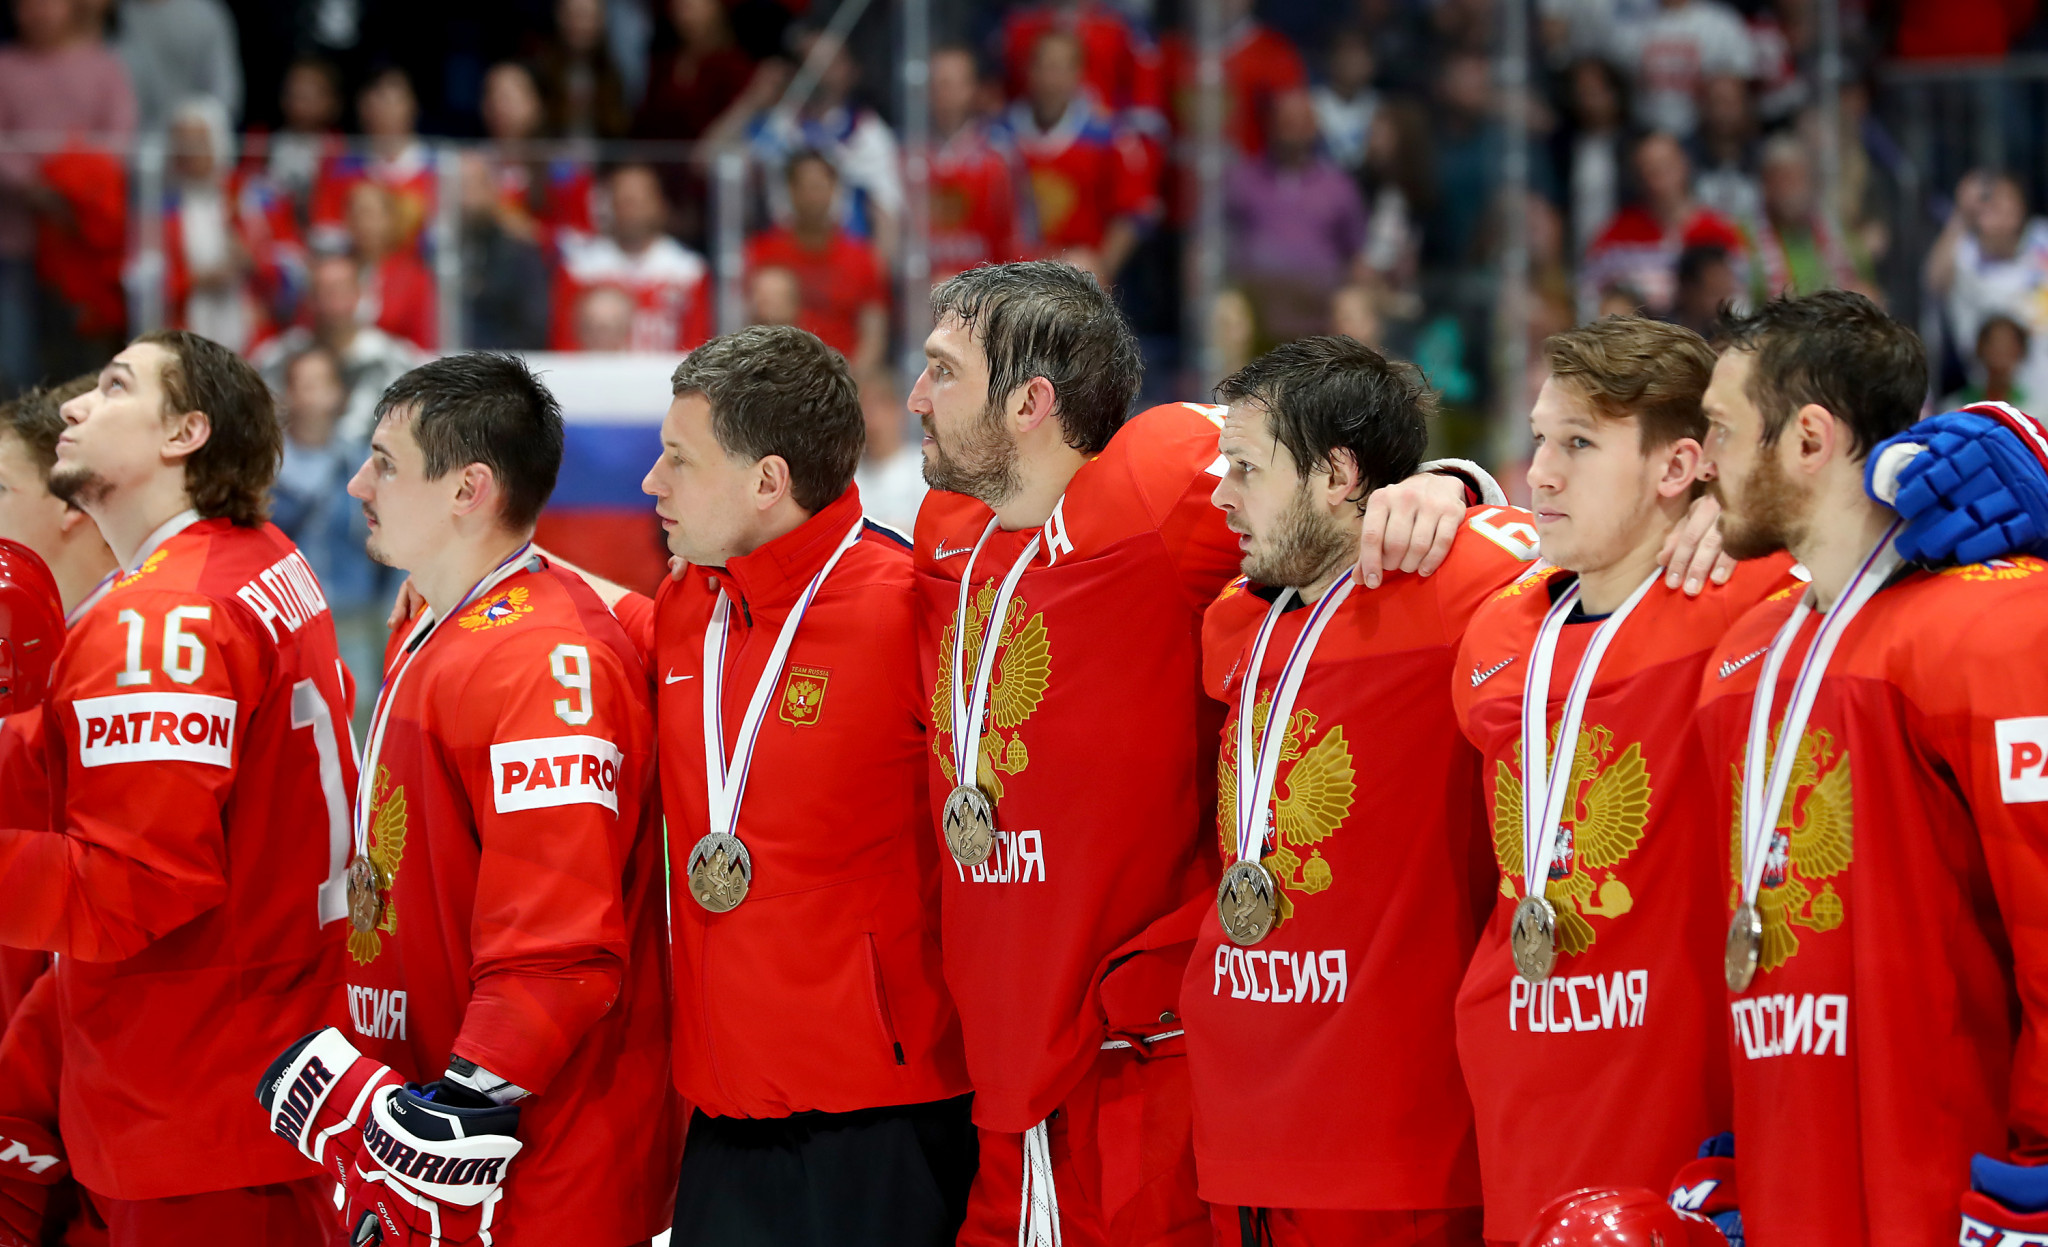 The name Russia and Russian symbols are prohibited on kit for the World Championships and Winter Olympics ©Getty Images